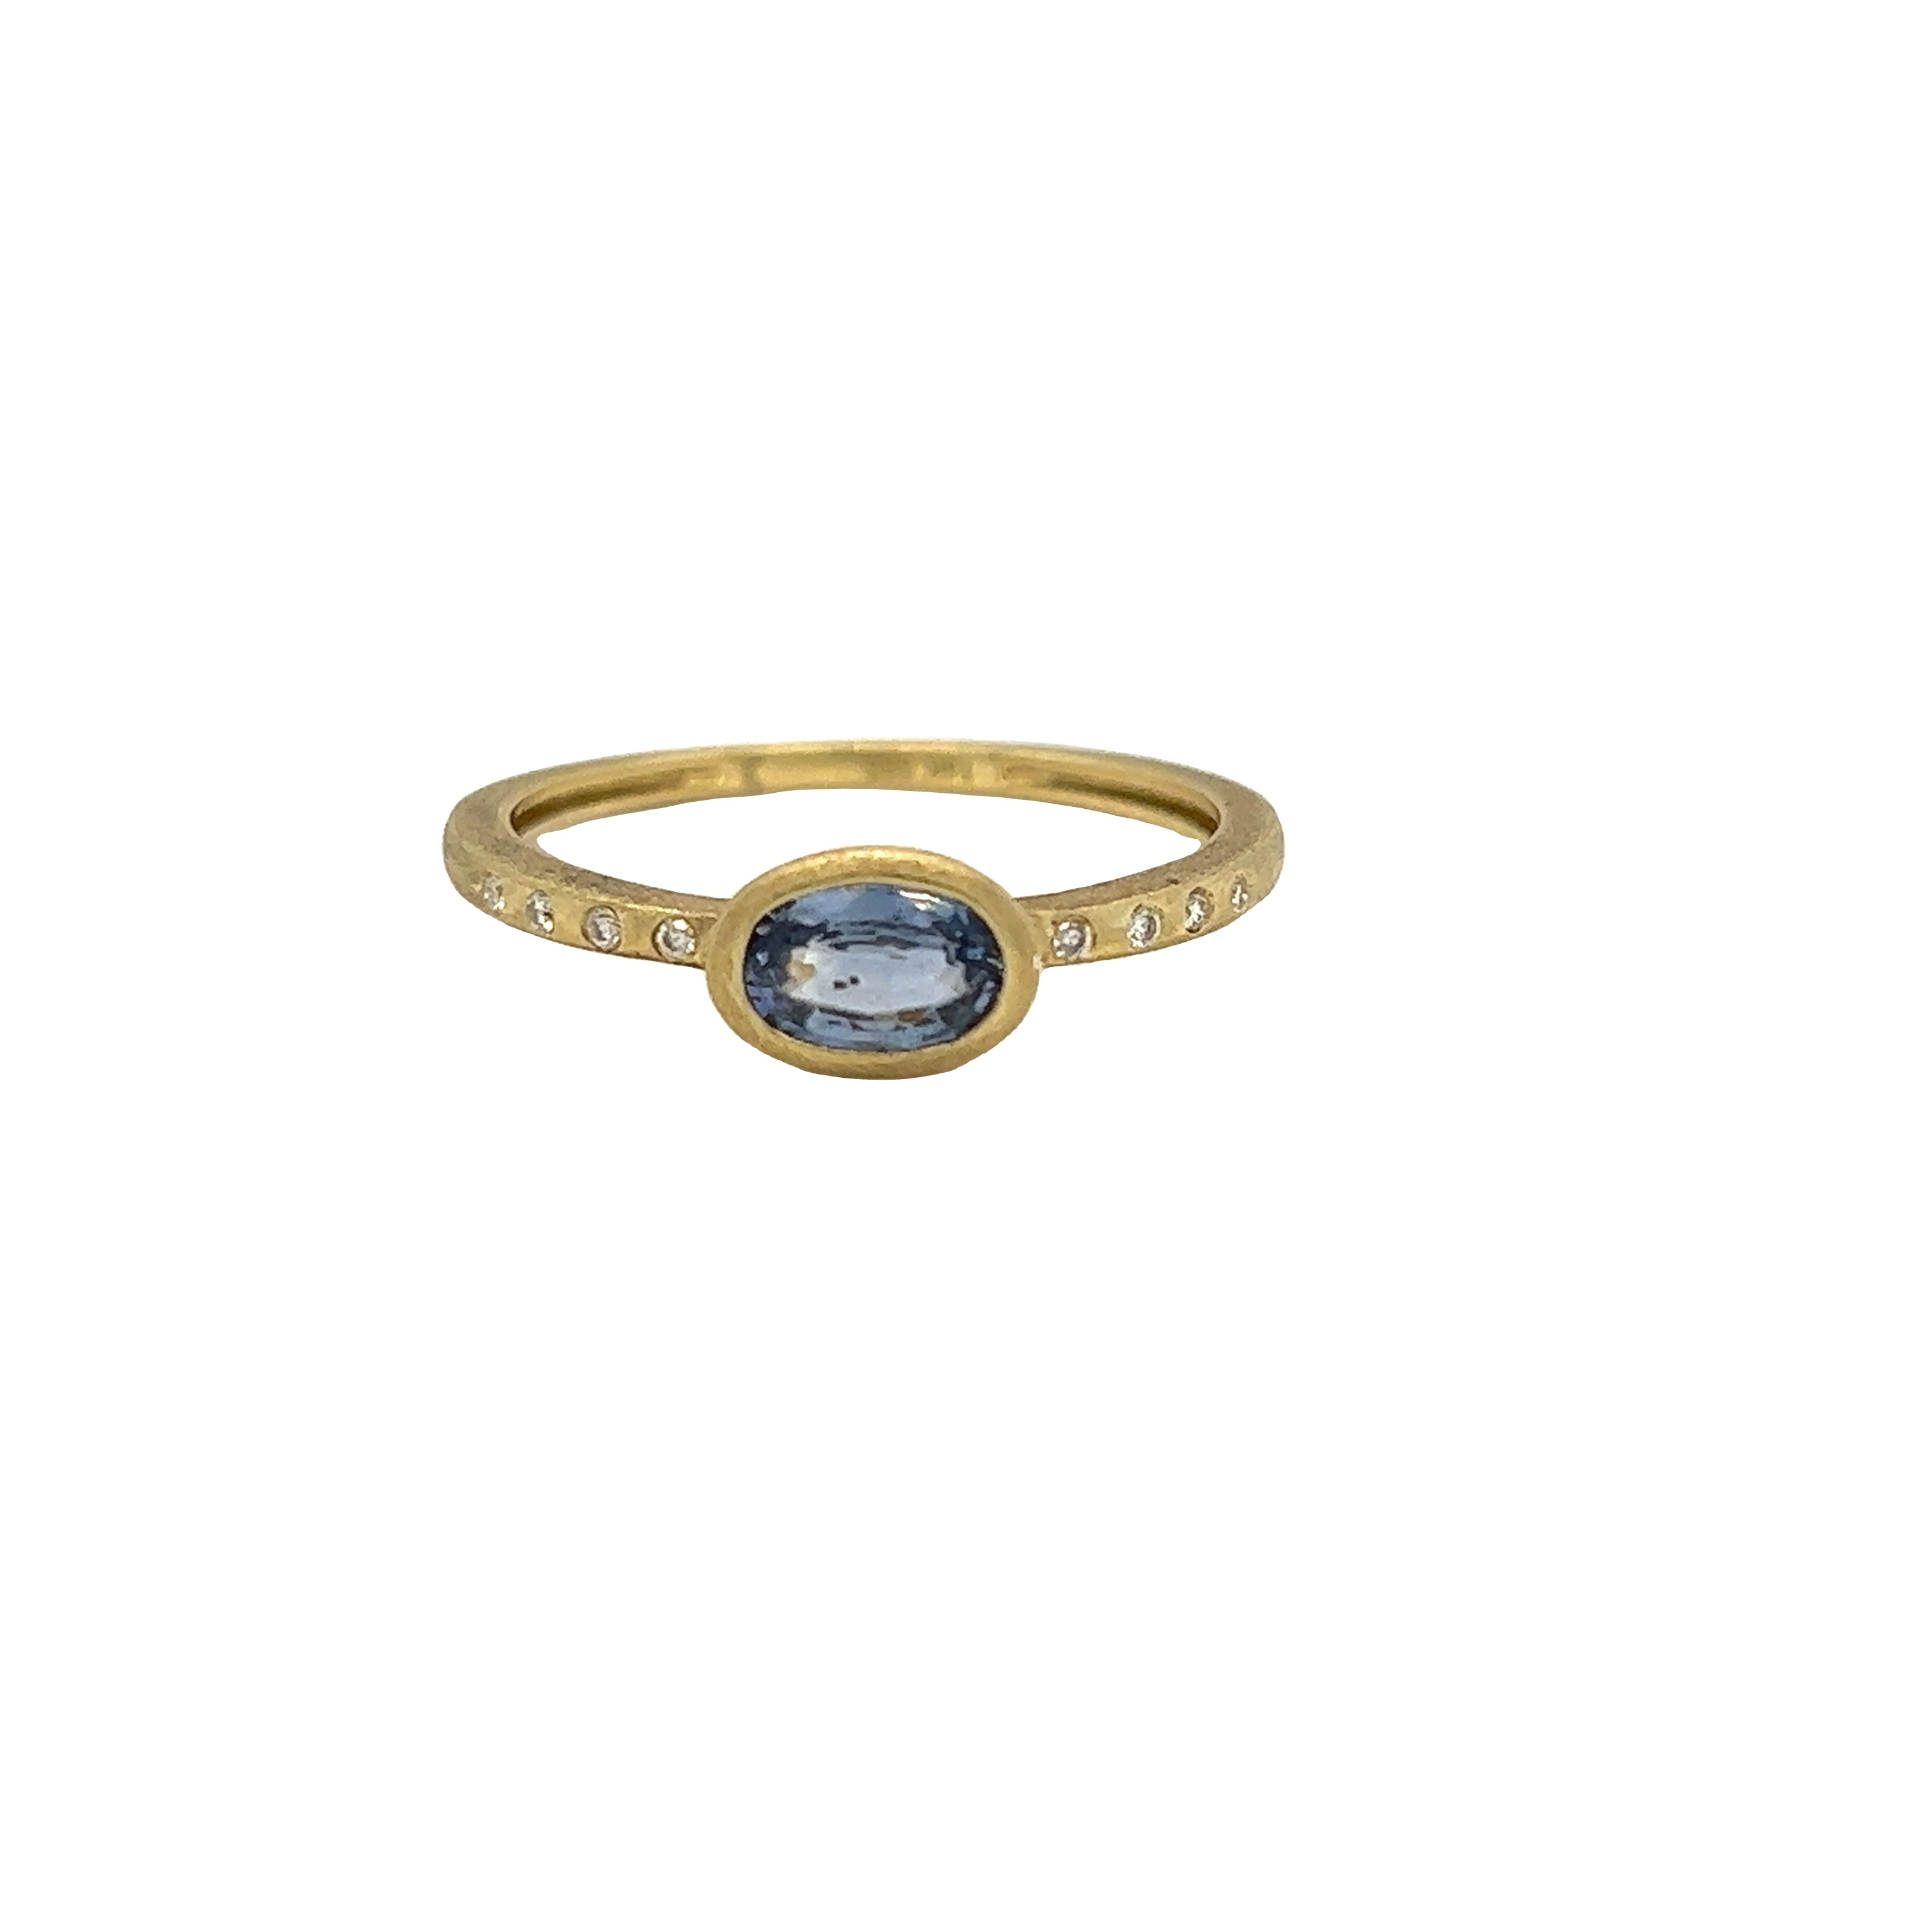 Featured image for “Sapphire and Diamond Band”